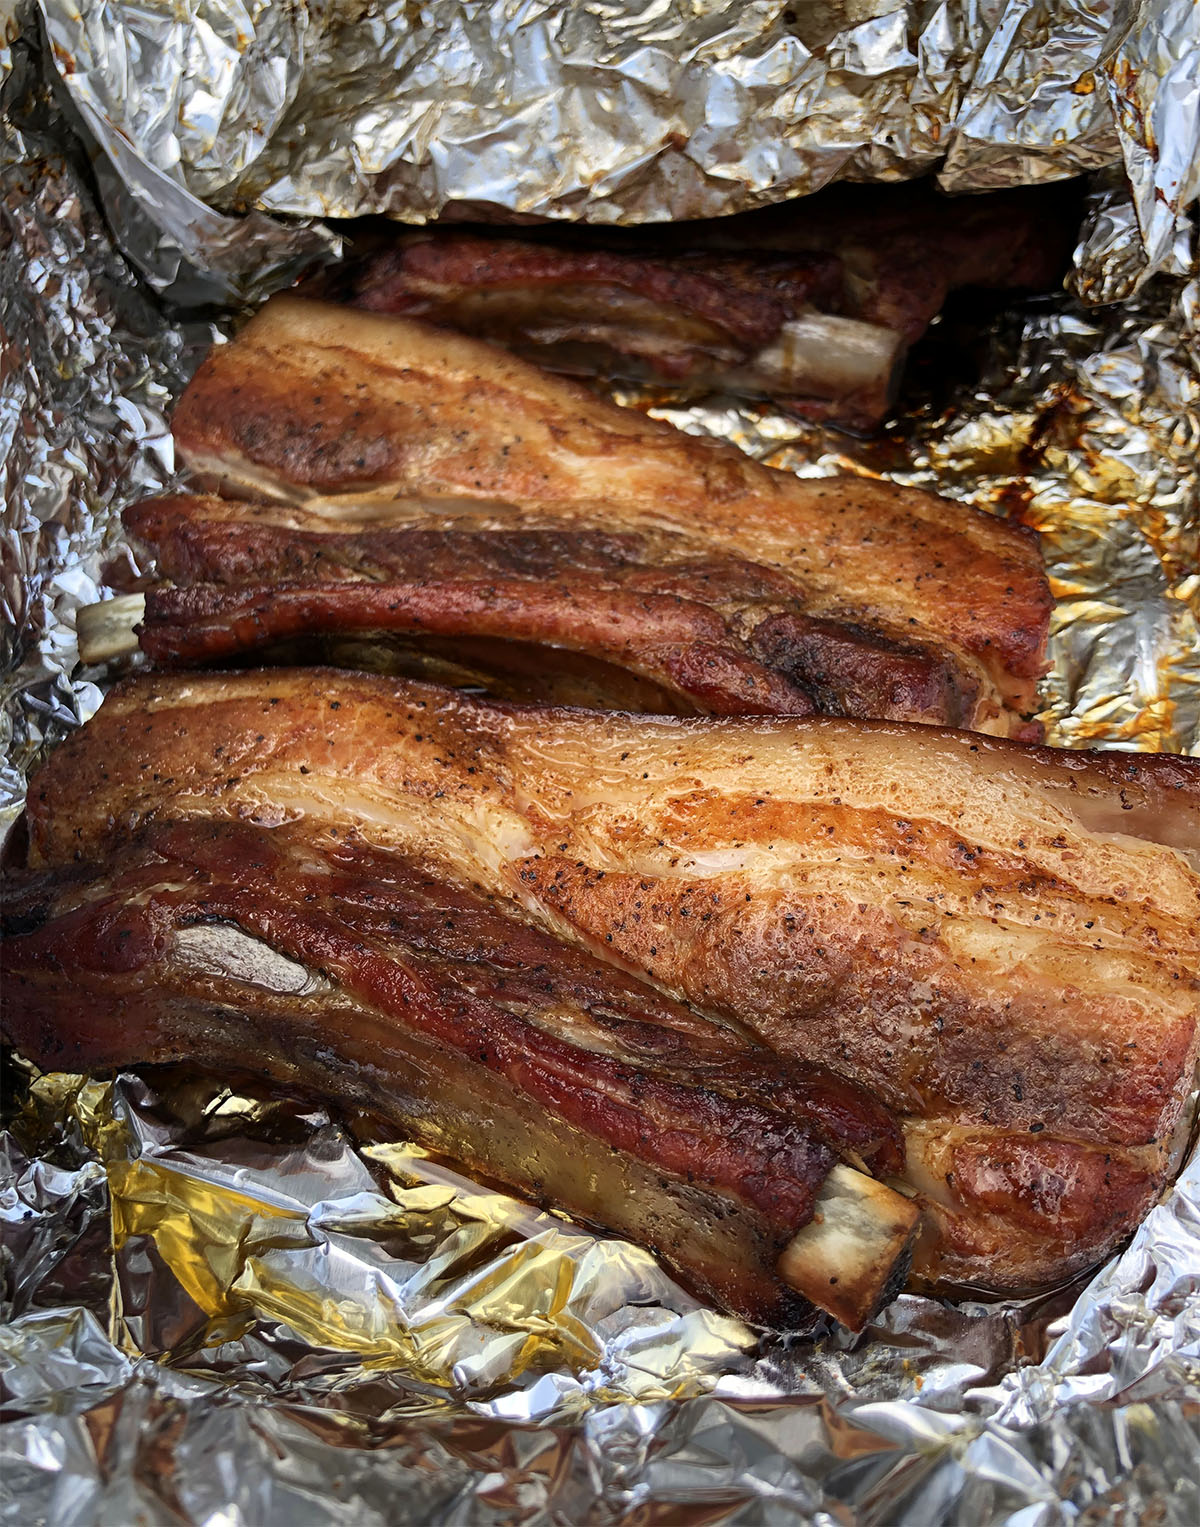 https://www.specialtygashouse.com/wp-content/uploads/2021/09/pork-belly-ribs-wrapped.jpg